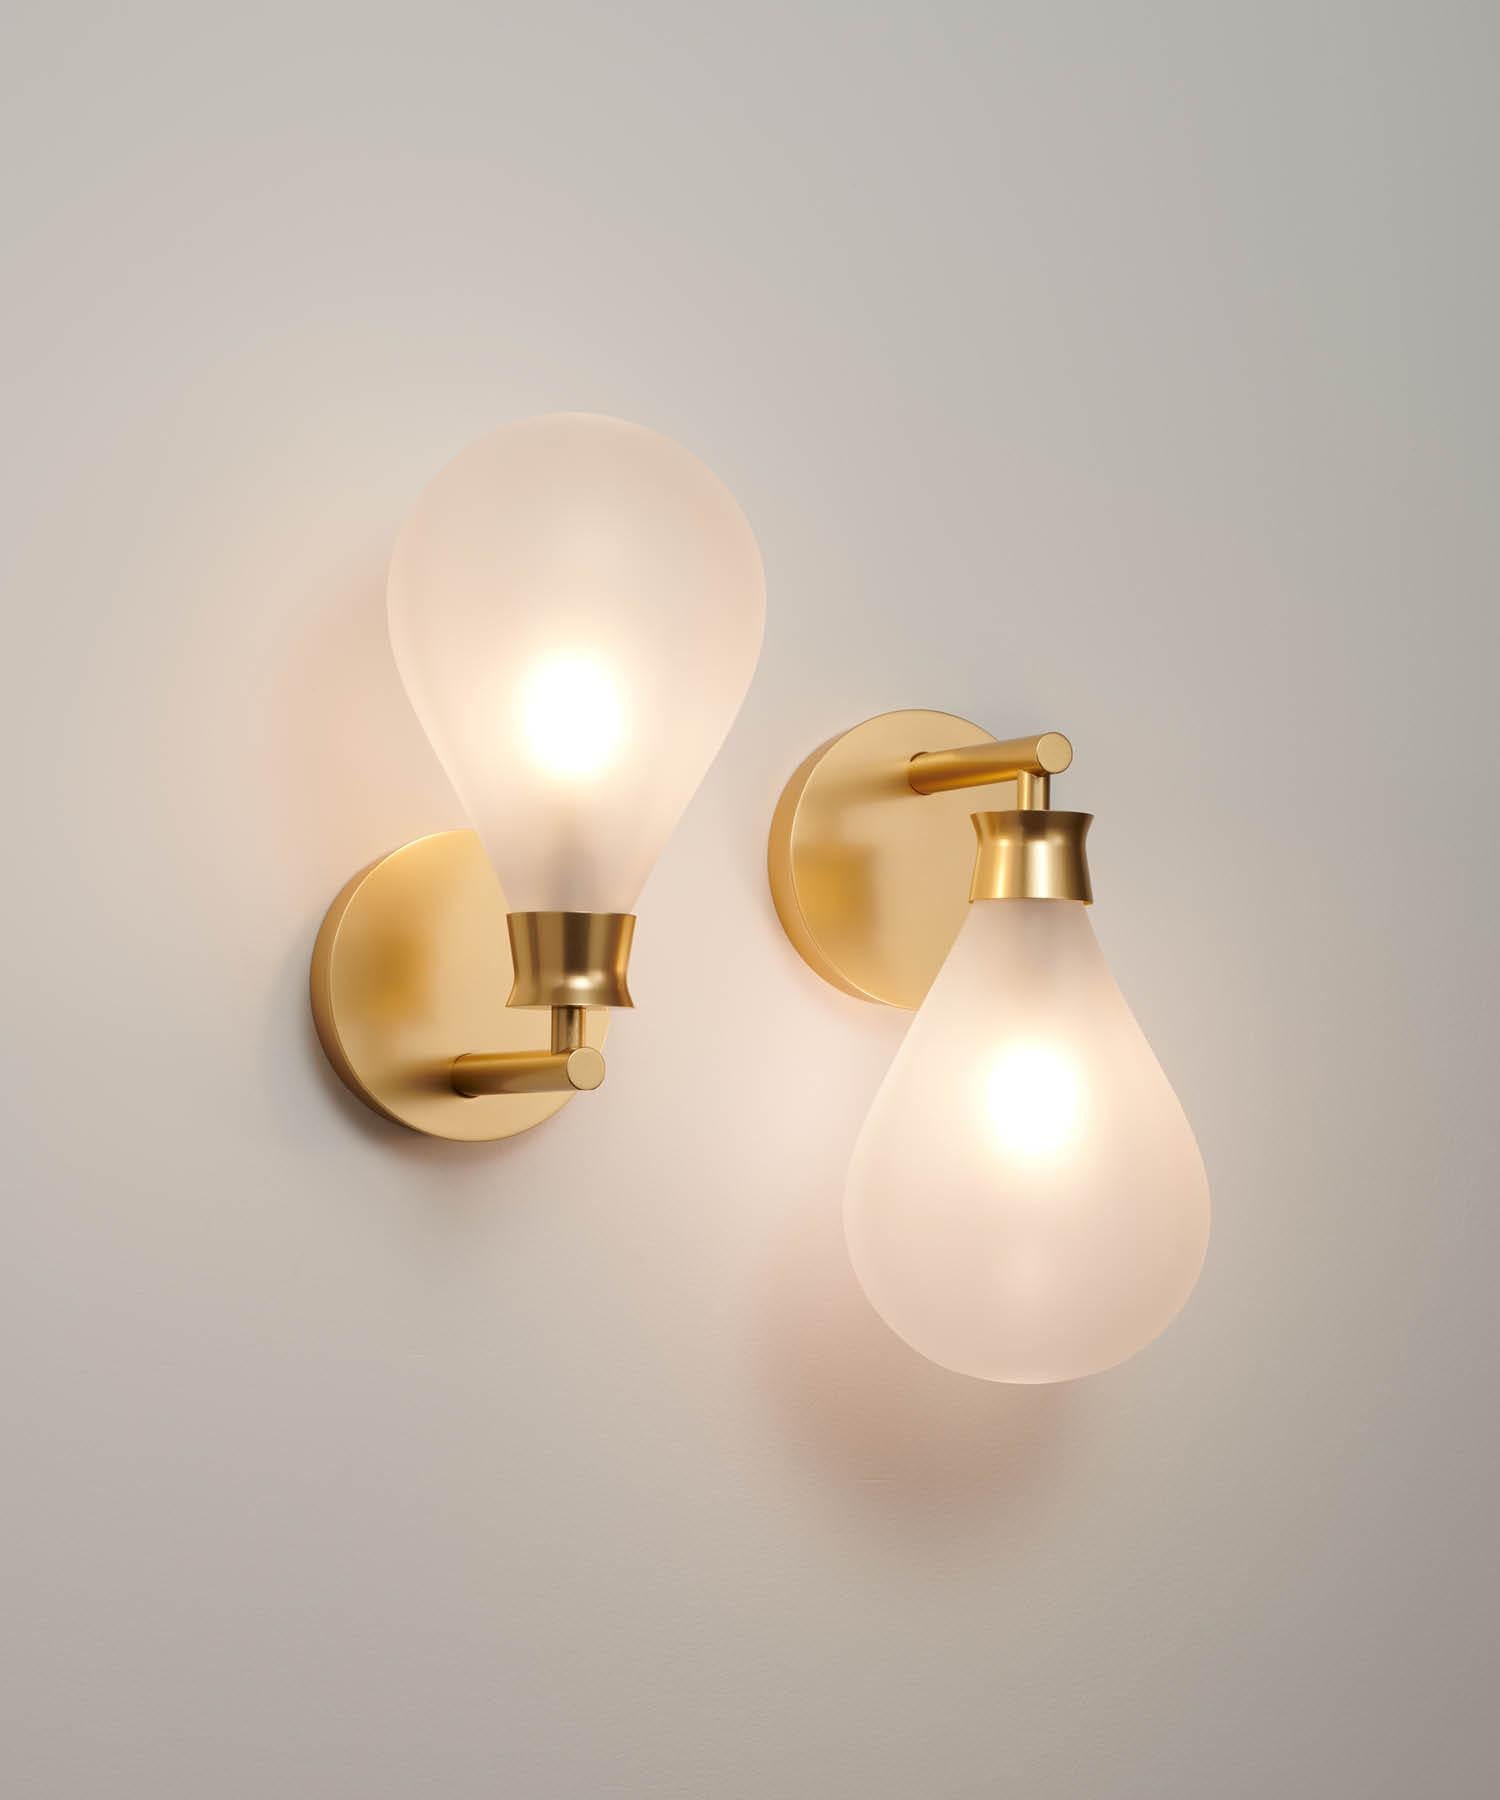 Polished Cintola Wall Light in Satin Gold with Rose Handblown Glass Globe